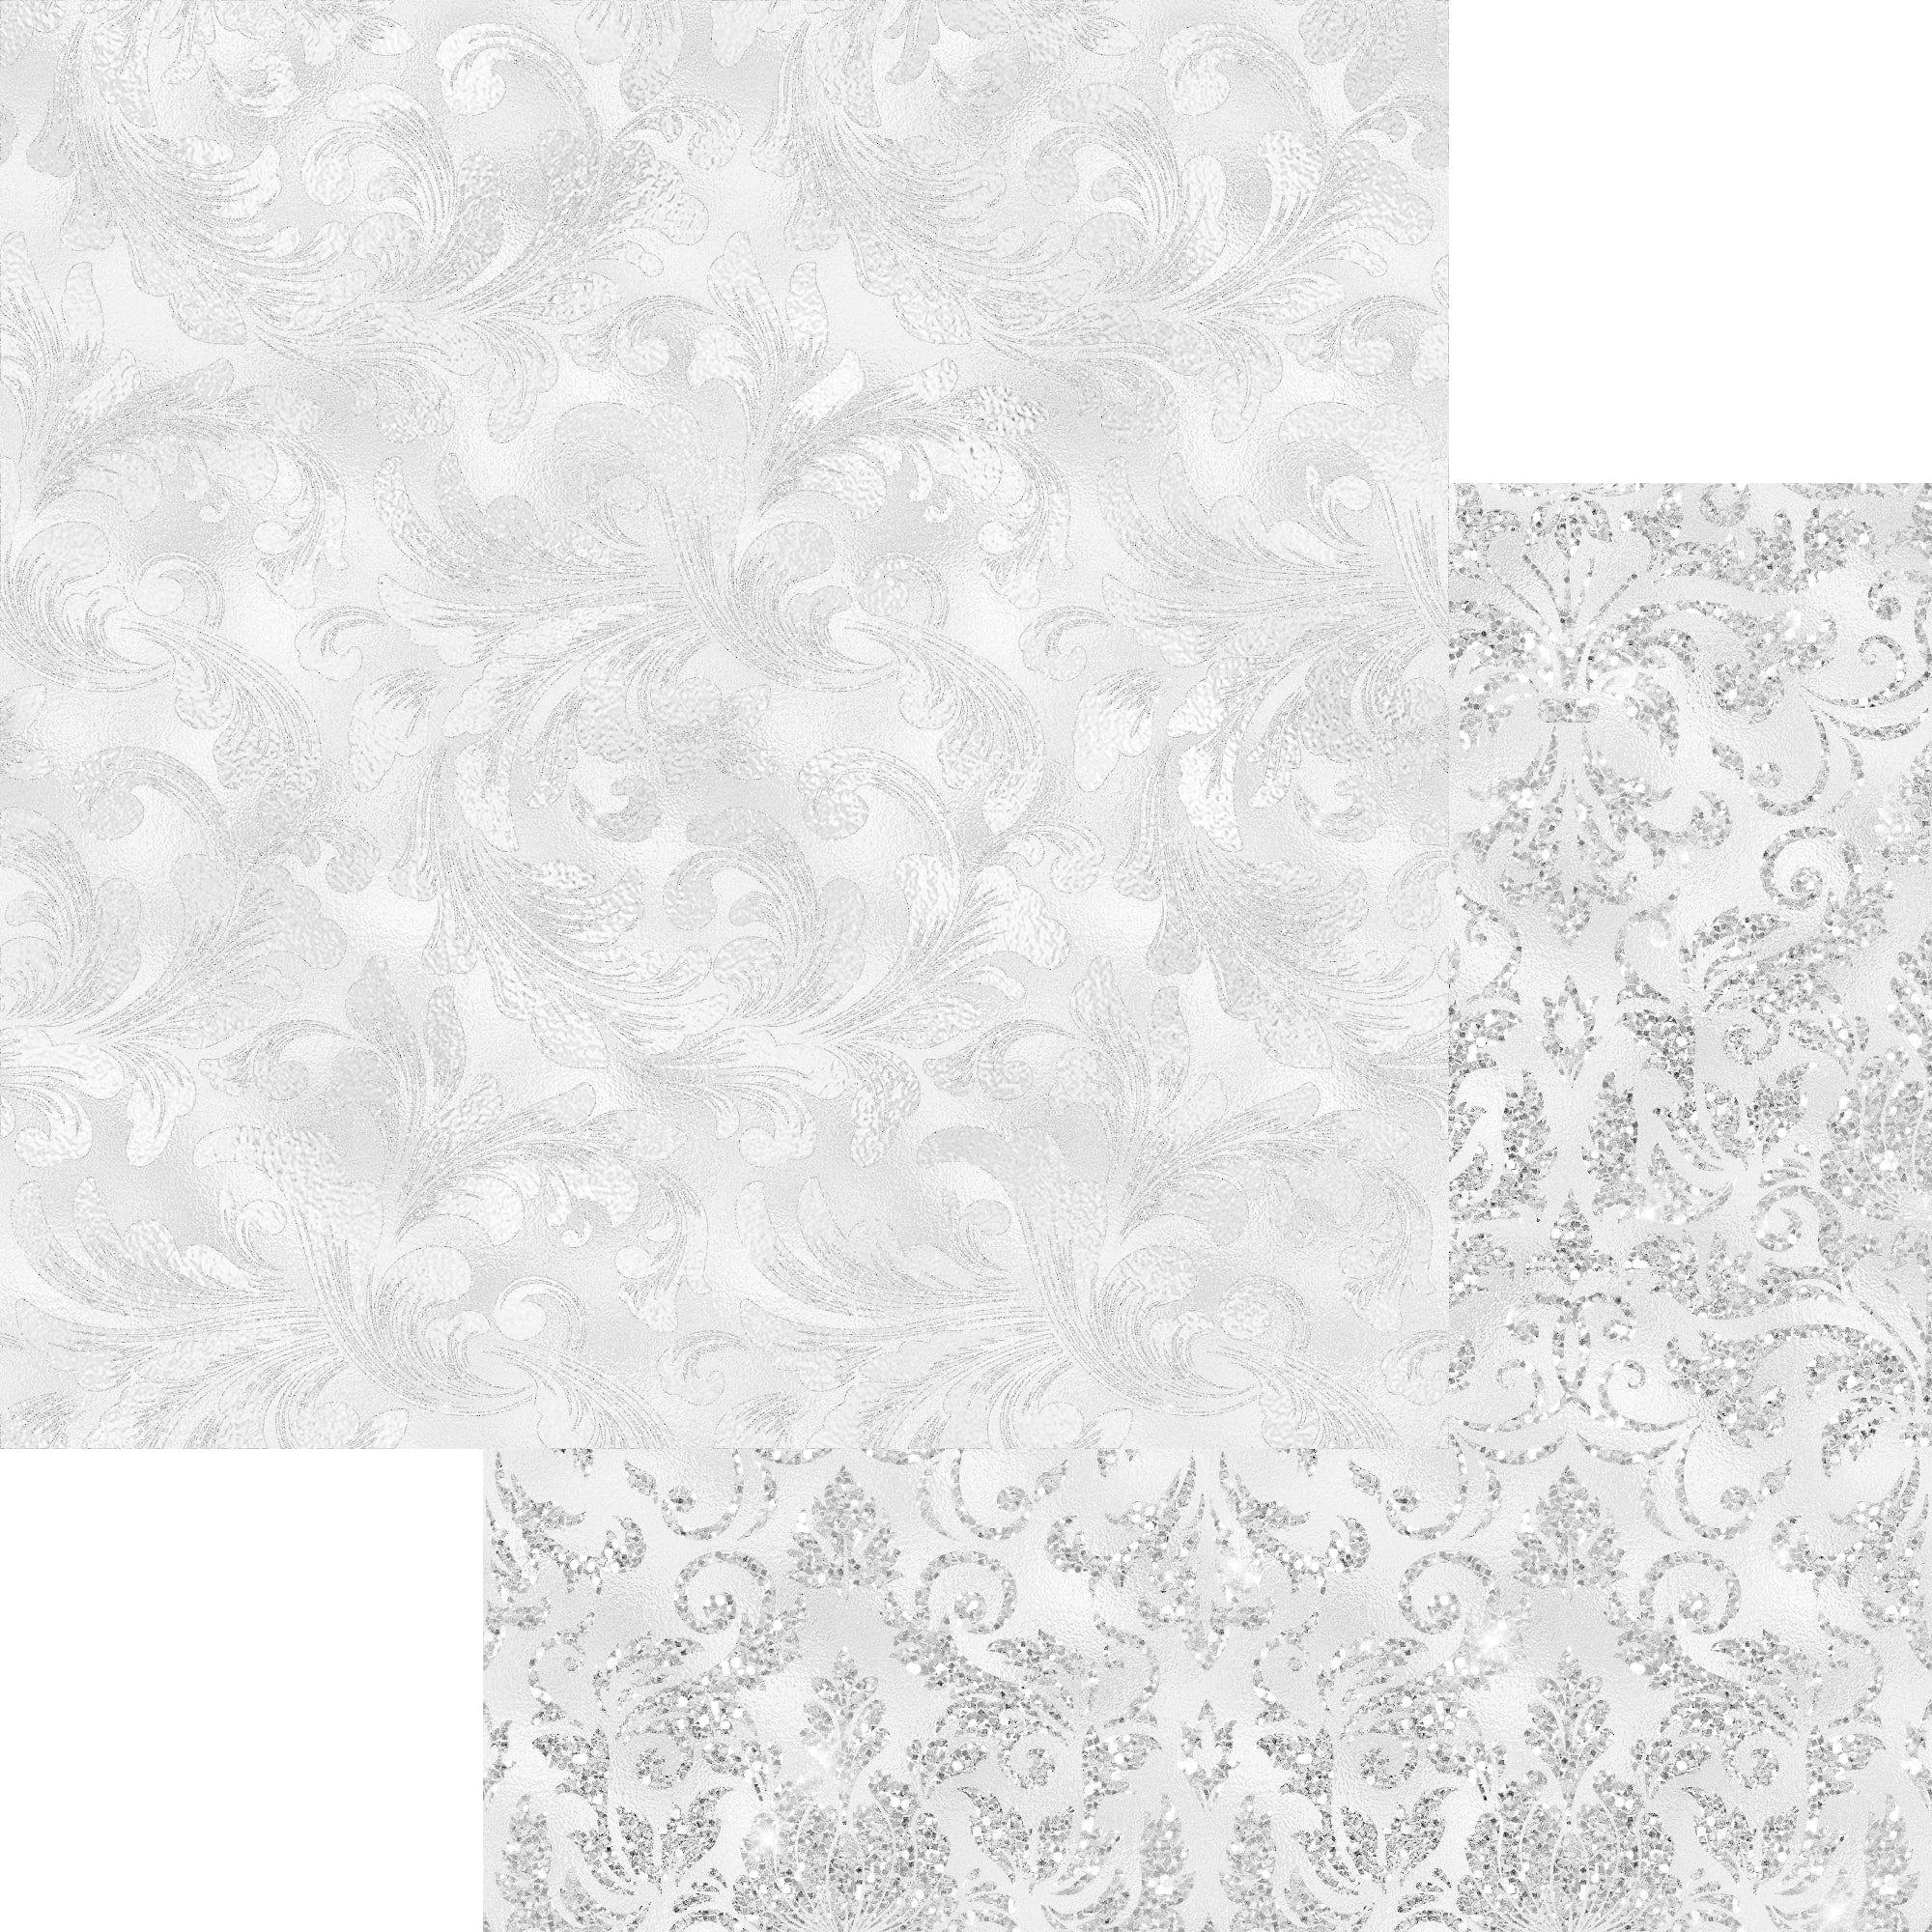 Prom Night Collection Elegant Evening 12 x 12 Double-Sided Scrapbook Paper by SSC Designs